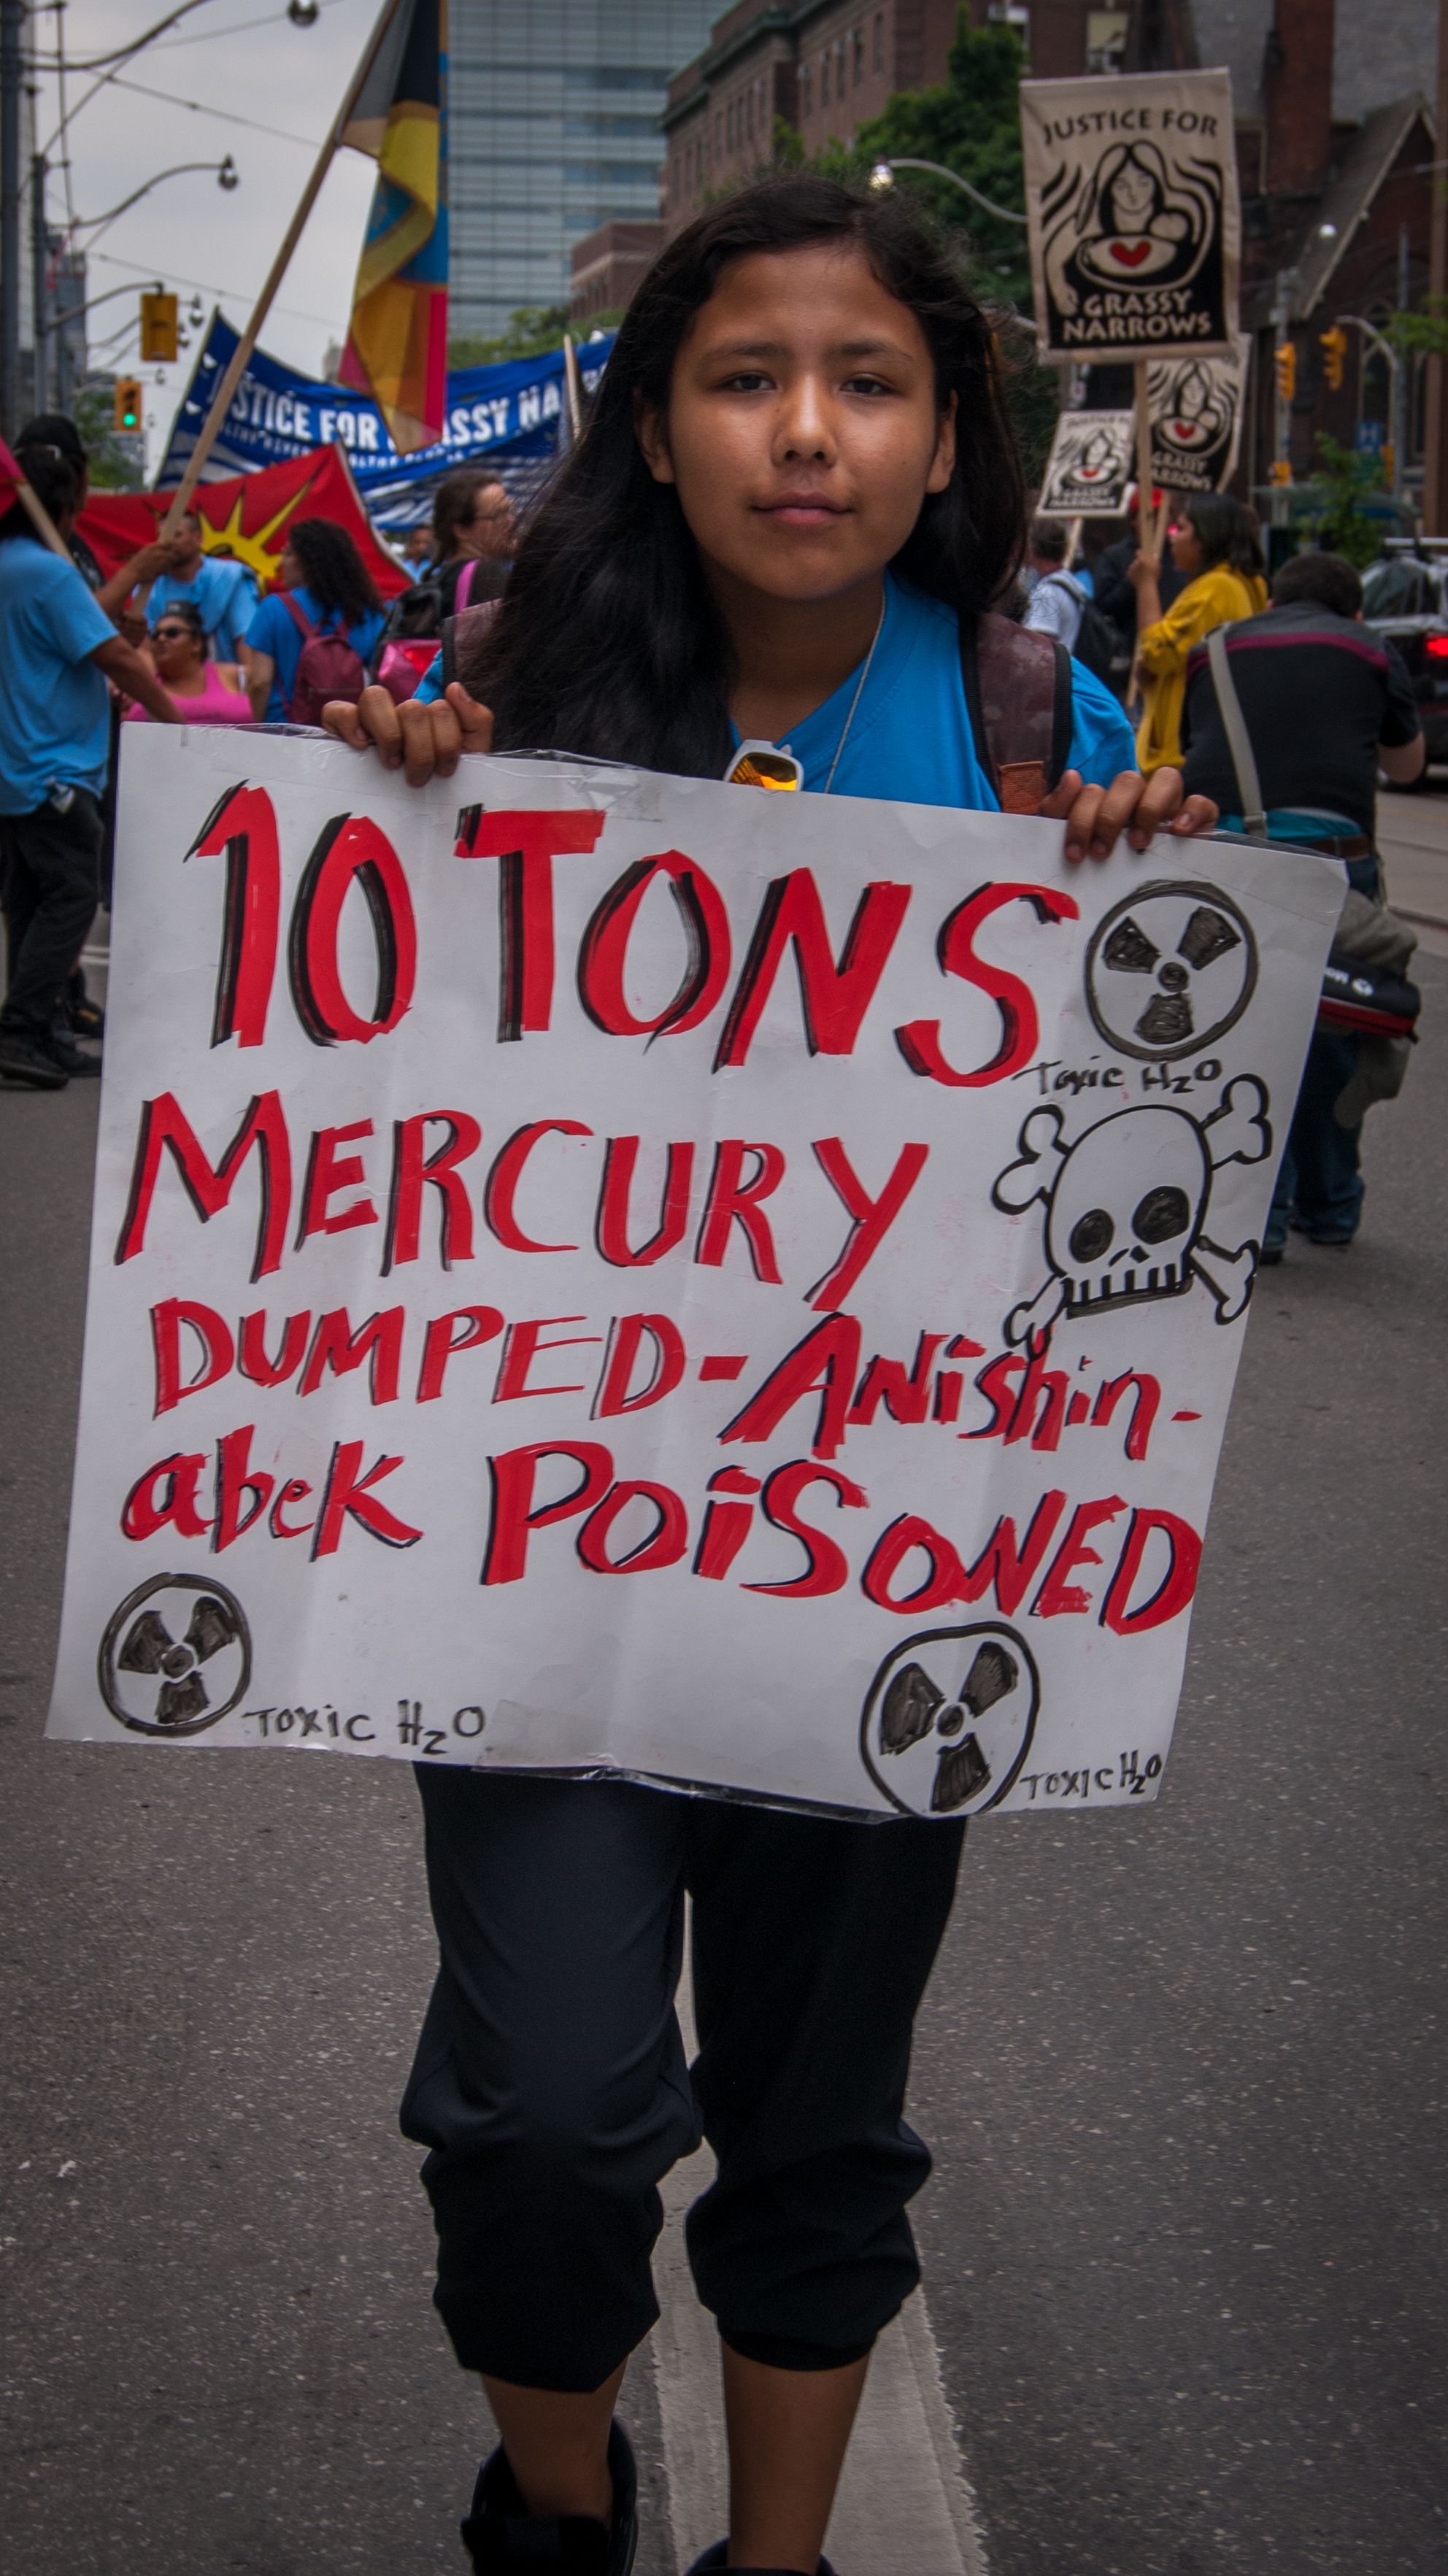 Paris Meekis poses with sign which reads, " 10 tons mercury dumped - Anishinabek poisoned." Image by Shelby Gilson. Canada, 2019.